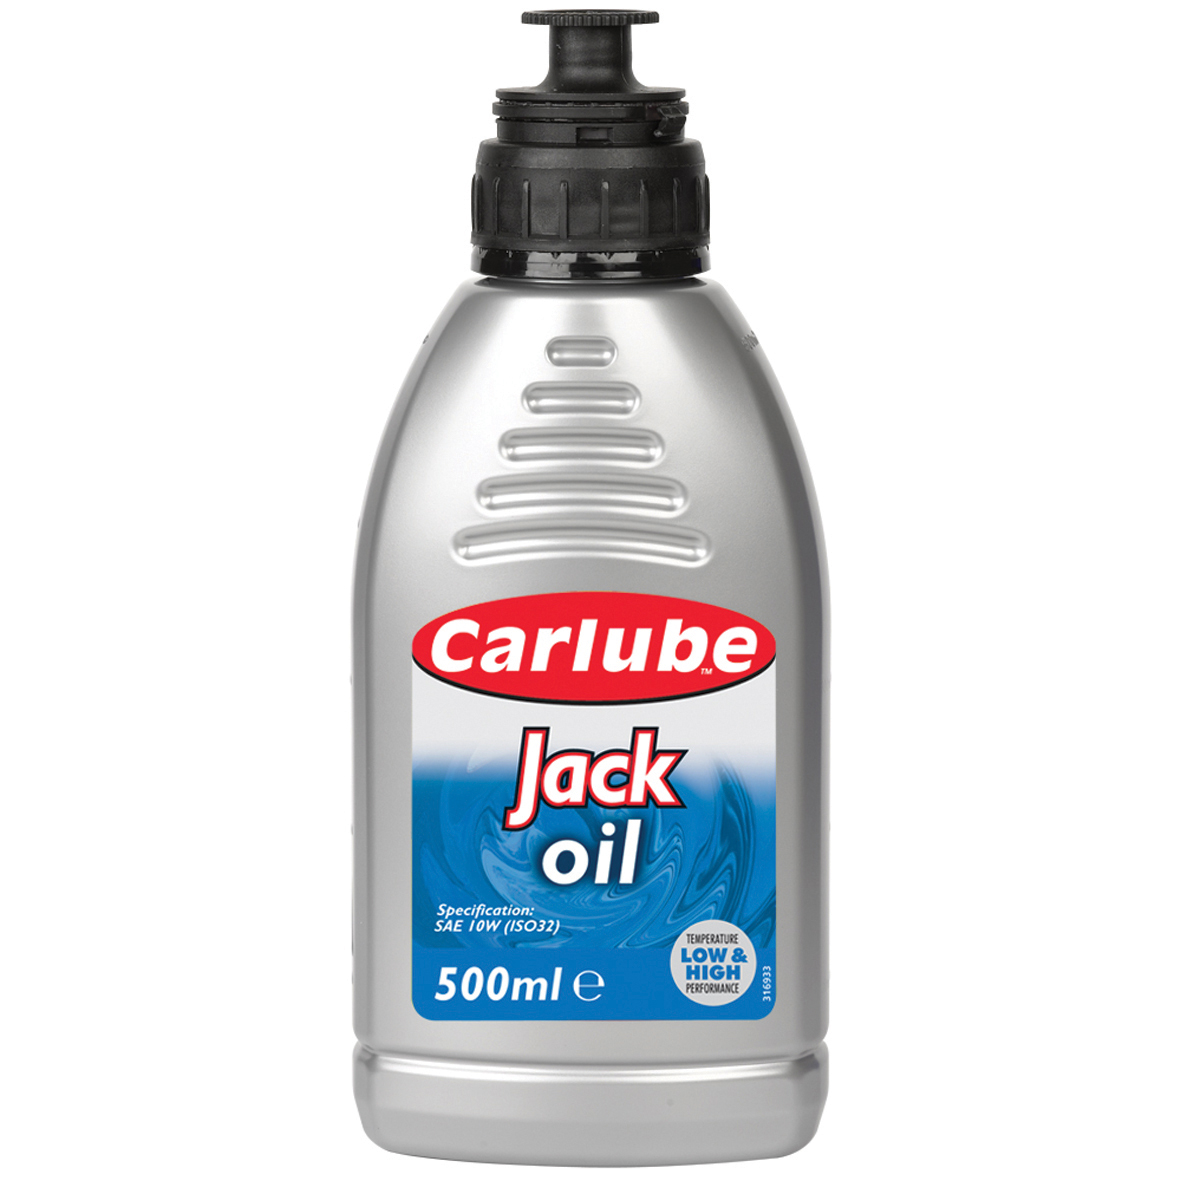 Picture of Carlube Xhj501 Jack Oil 500ml